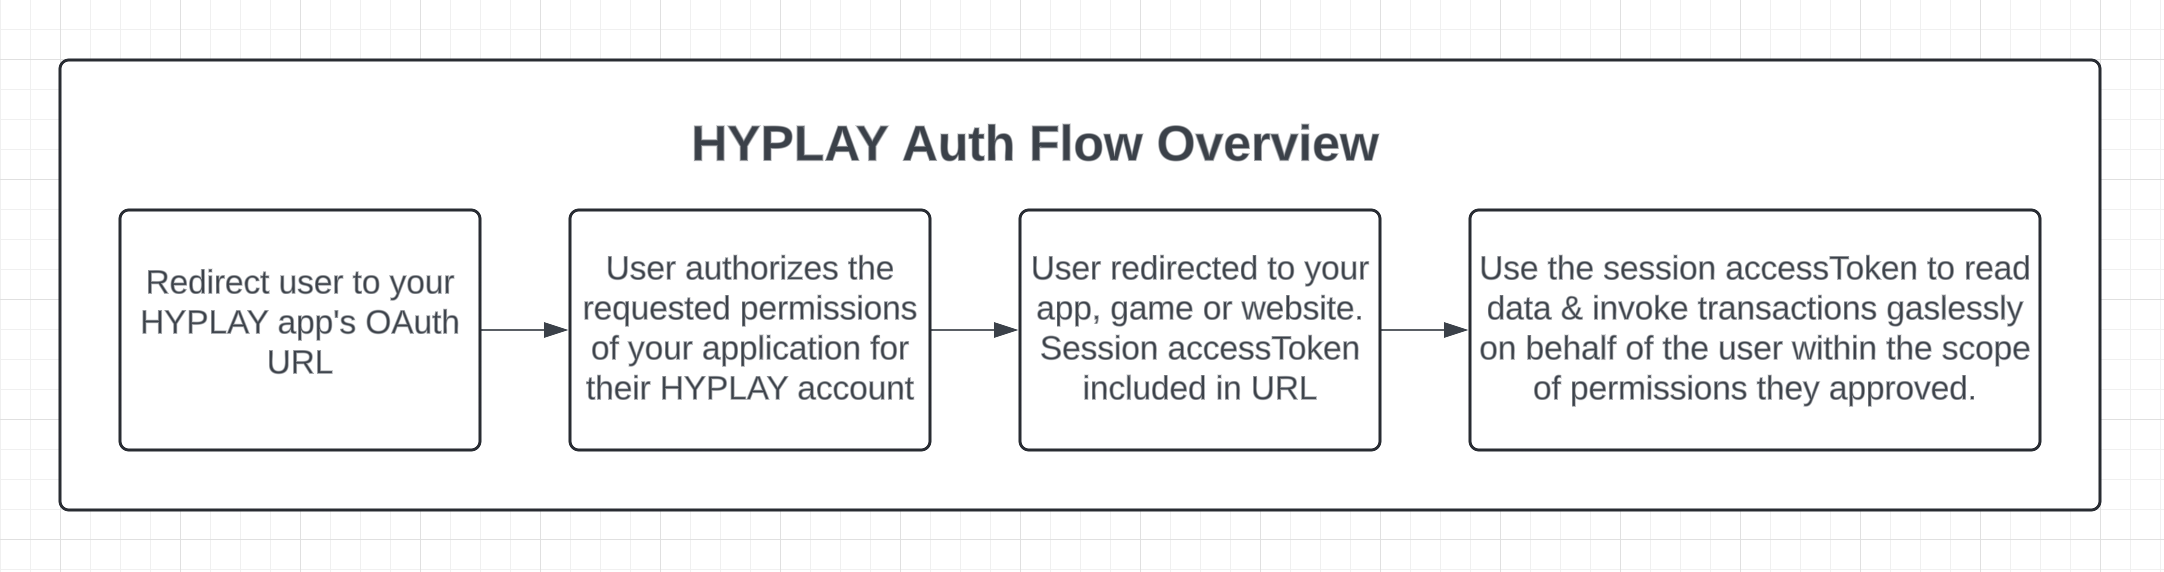 HYPLAY auth flow overview